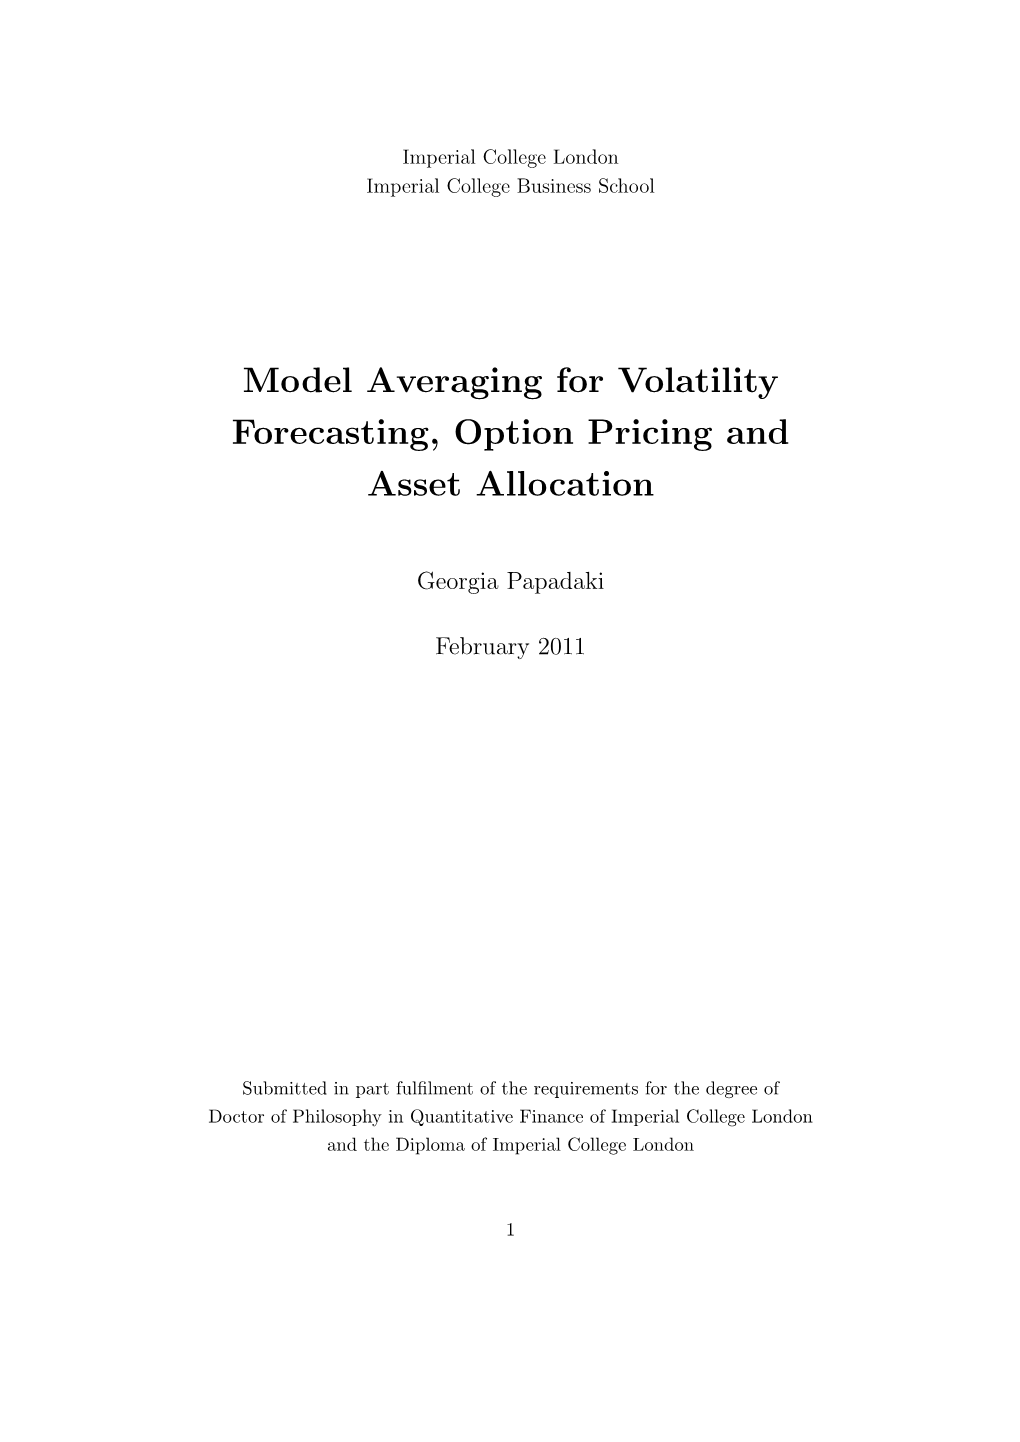 Model Averaging for Volatility Forecasting, Option Pricing and Asset Allocation